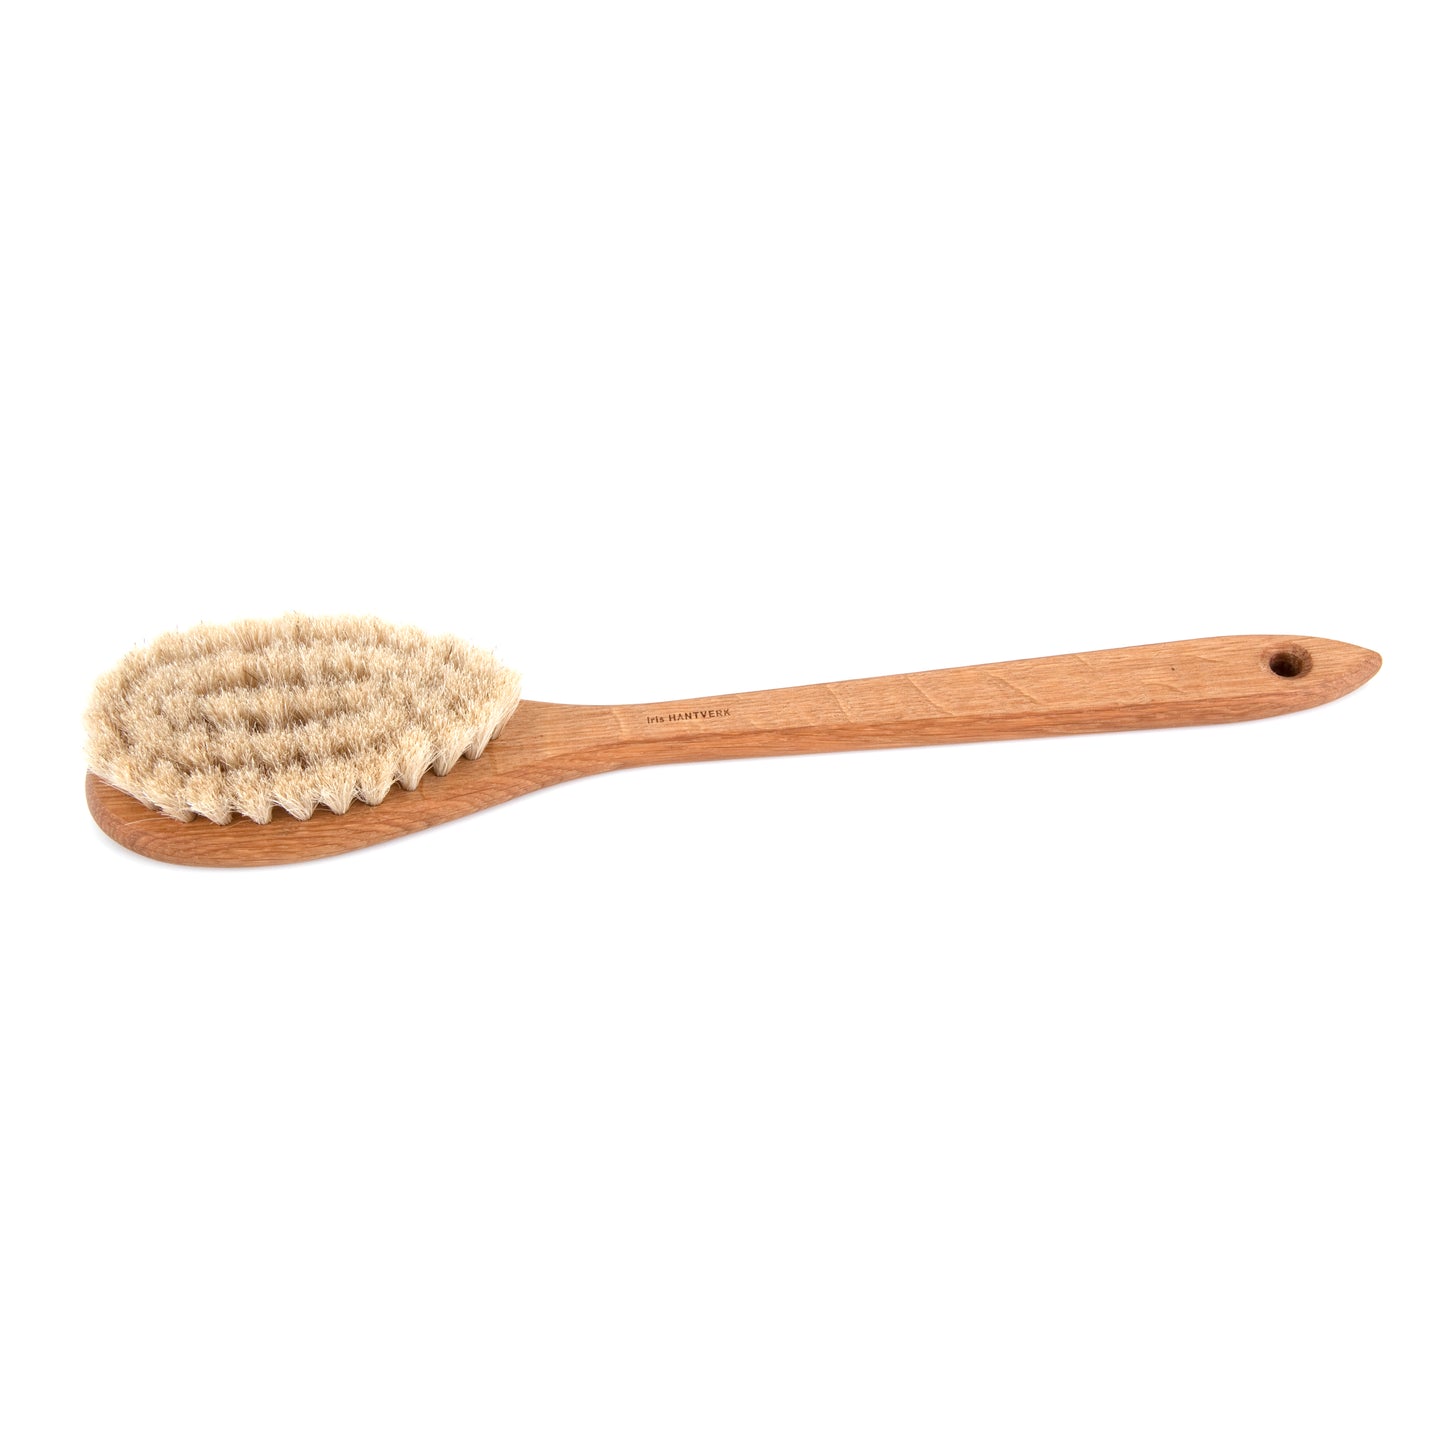 15.35 inch long oak bathing brush with natural fiber bristles and hole for hangnig